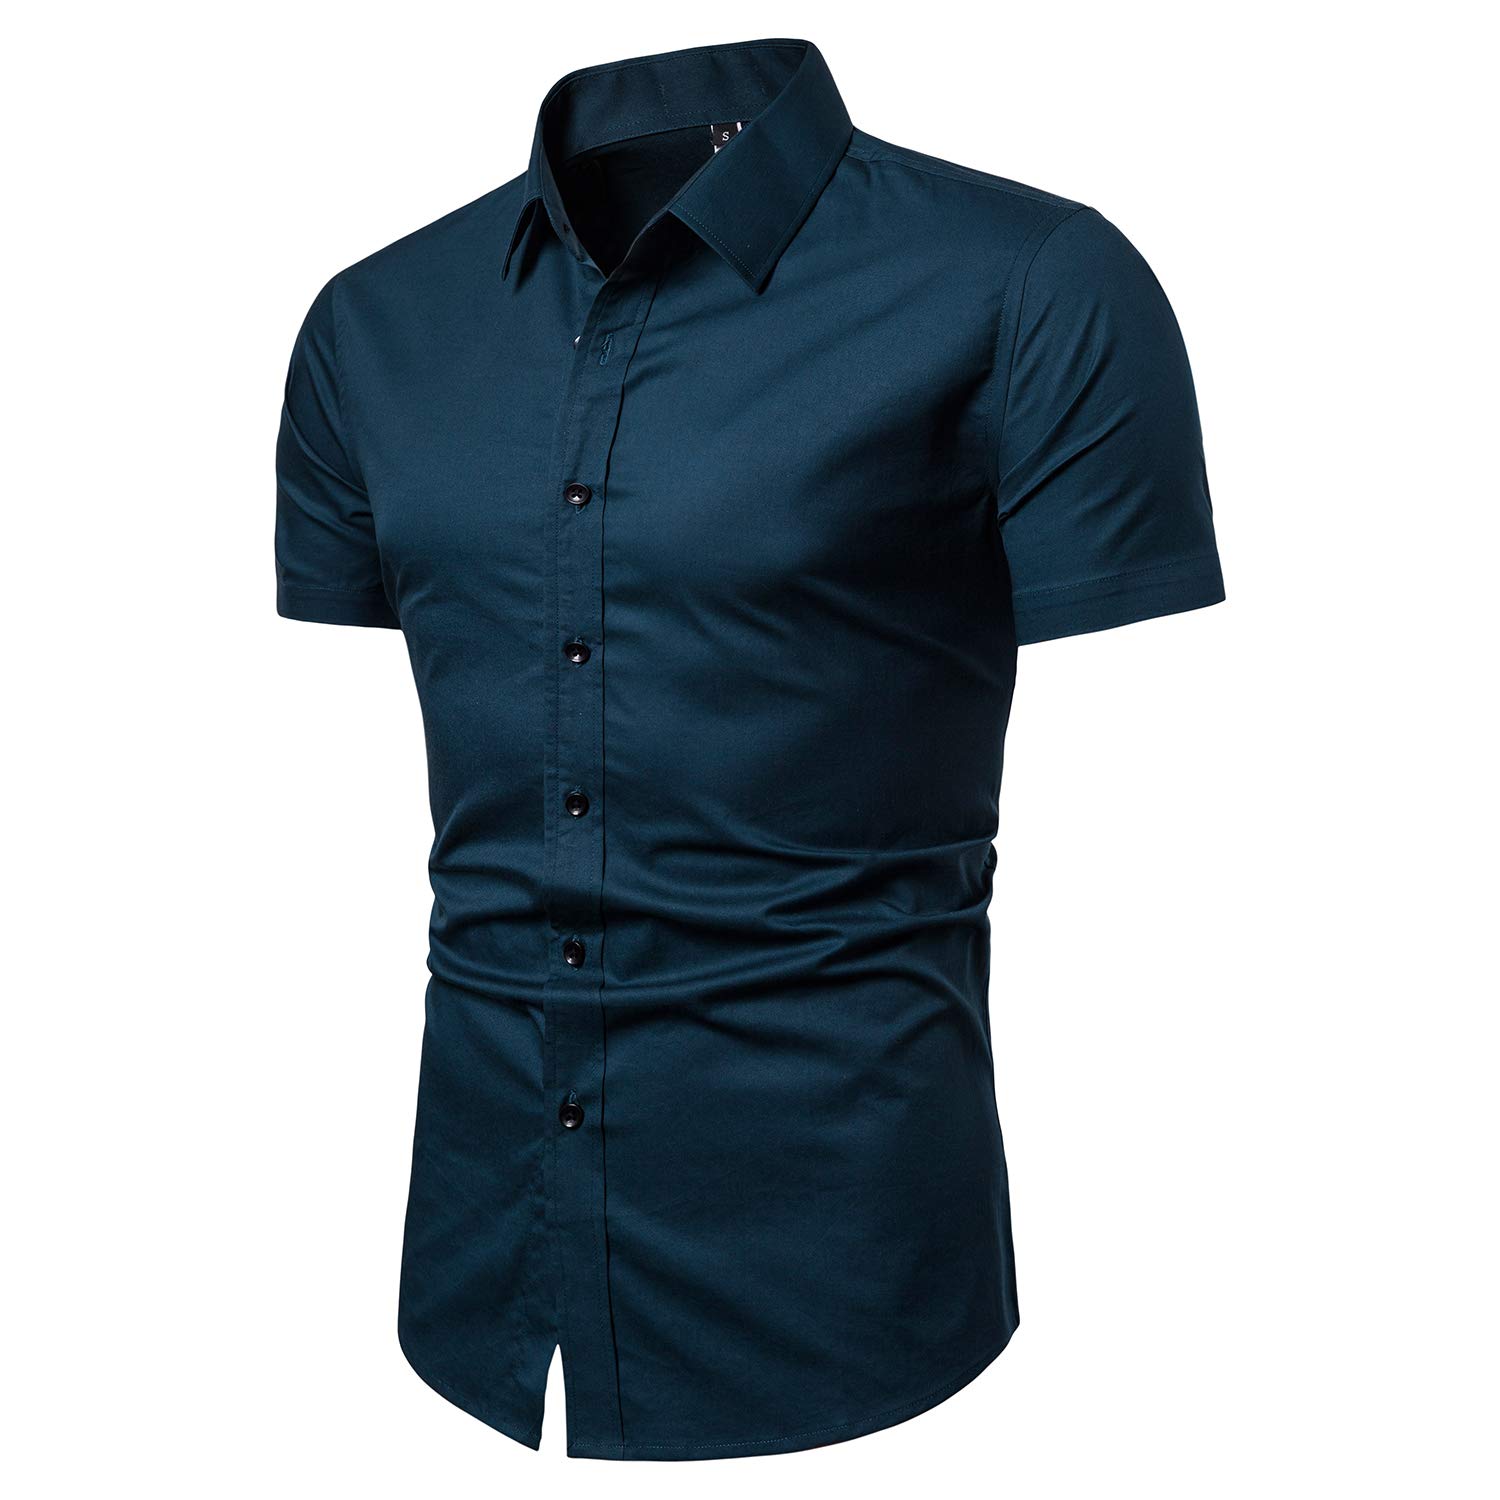 Men's business casual shirts, the realm of men's fashion encompasses a diverse array of styles, each tailored to specific occasions and settings.